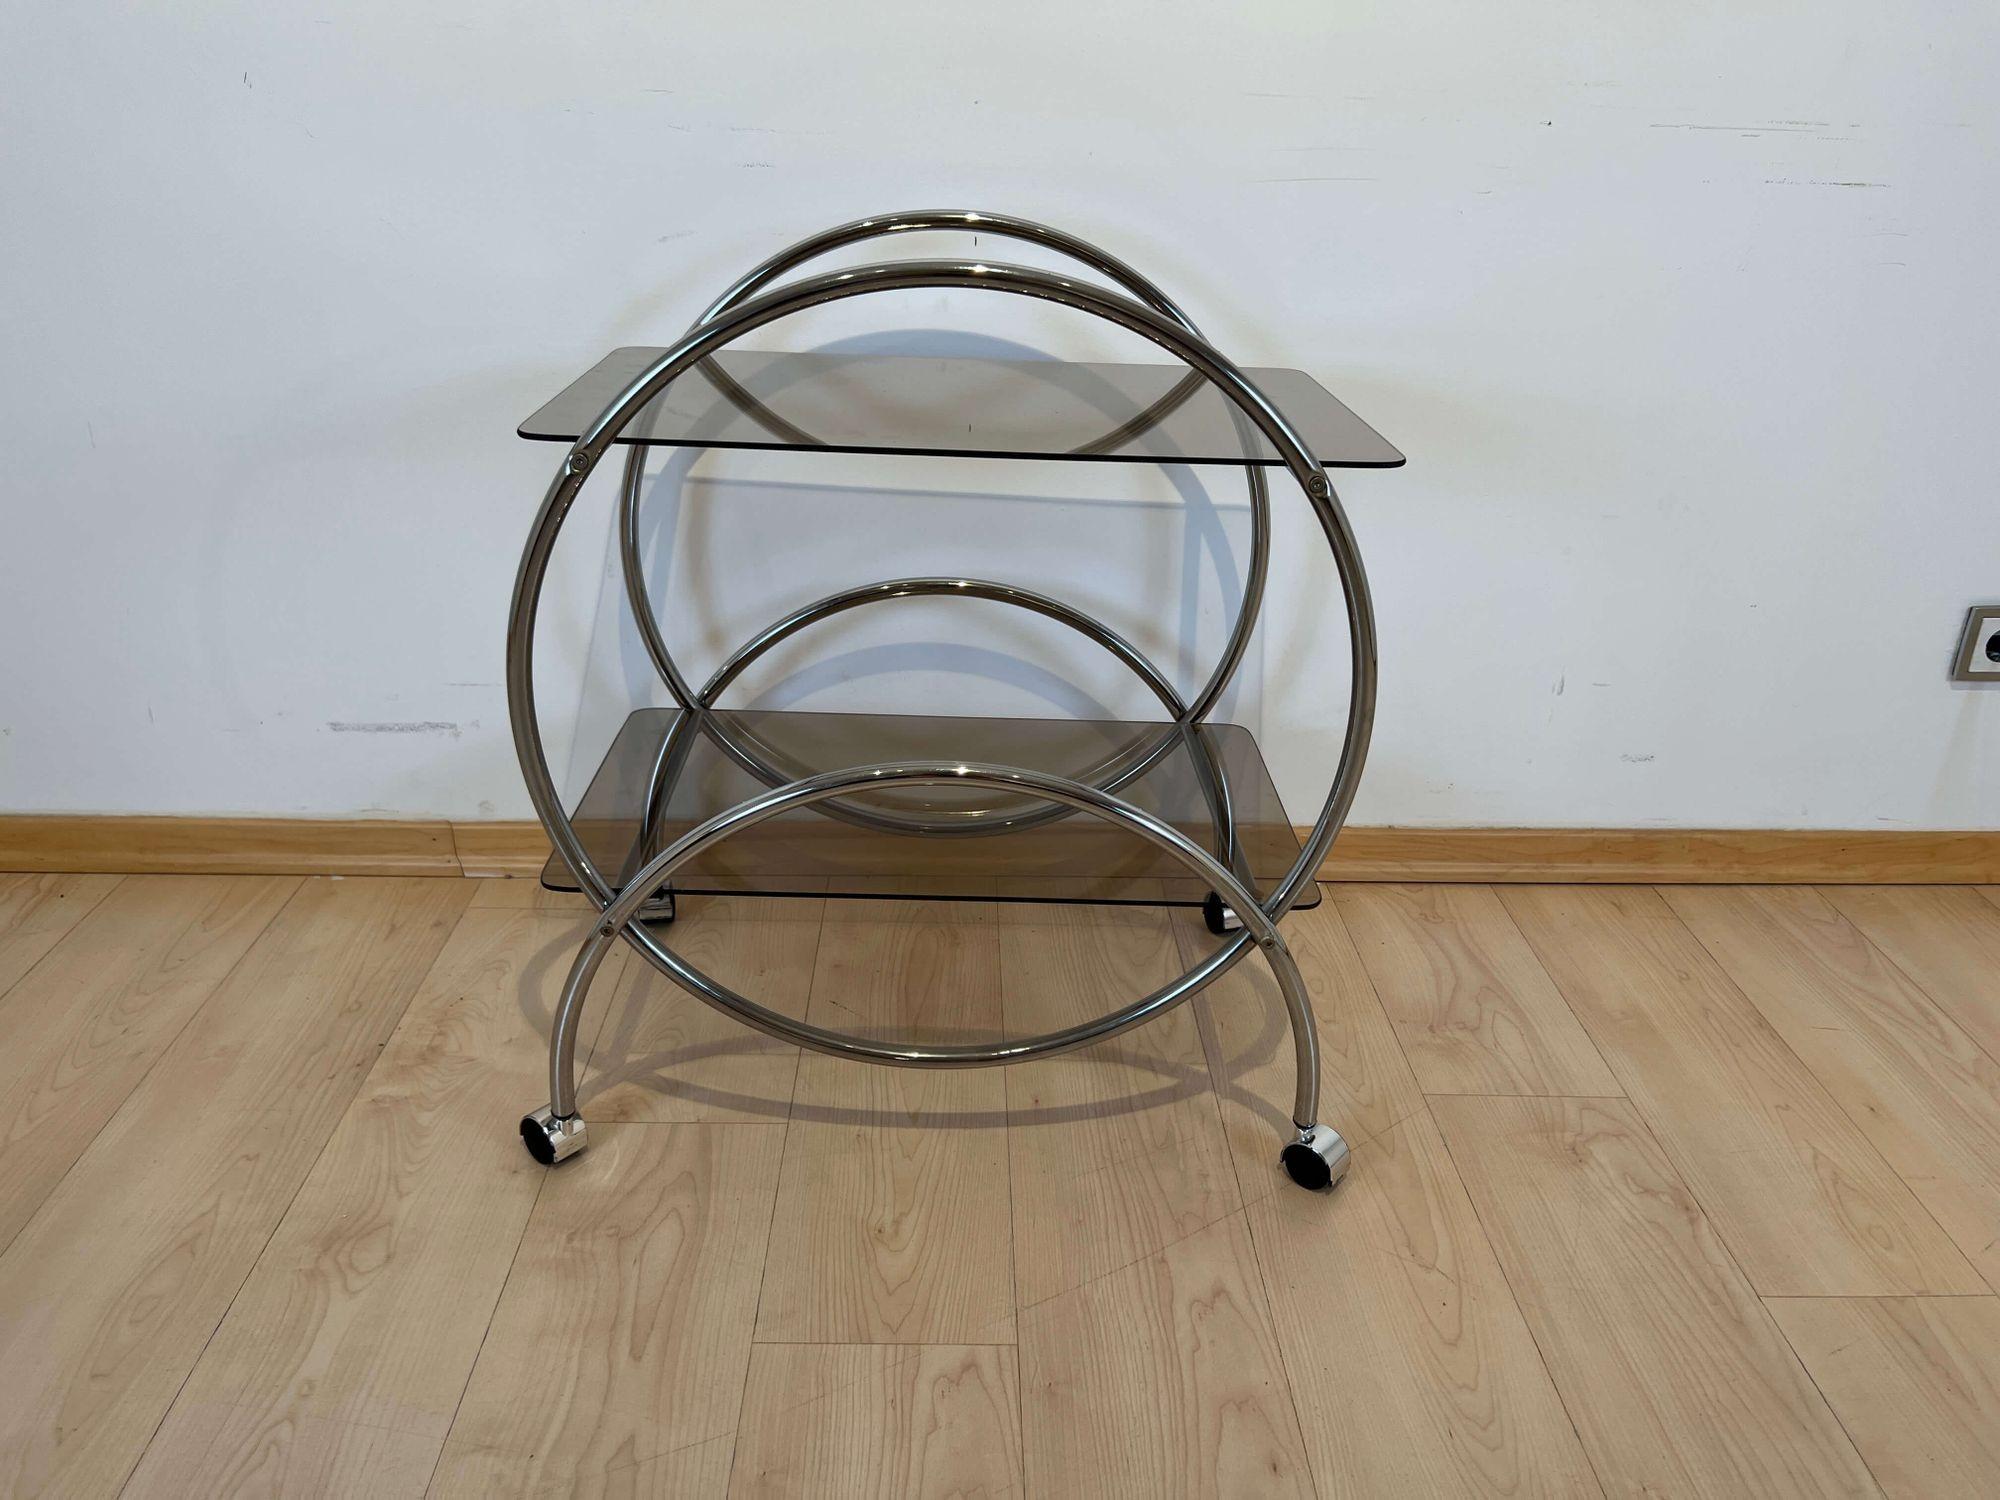 Round Art Deco Style, mid-century serving trolley from Germany around 1970.
 
Original patinated chromed steel tubes. Old smoked glasses.
 
Dimensions: H 73,5 cm x W 63 cm x D 48 cm.